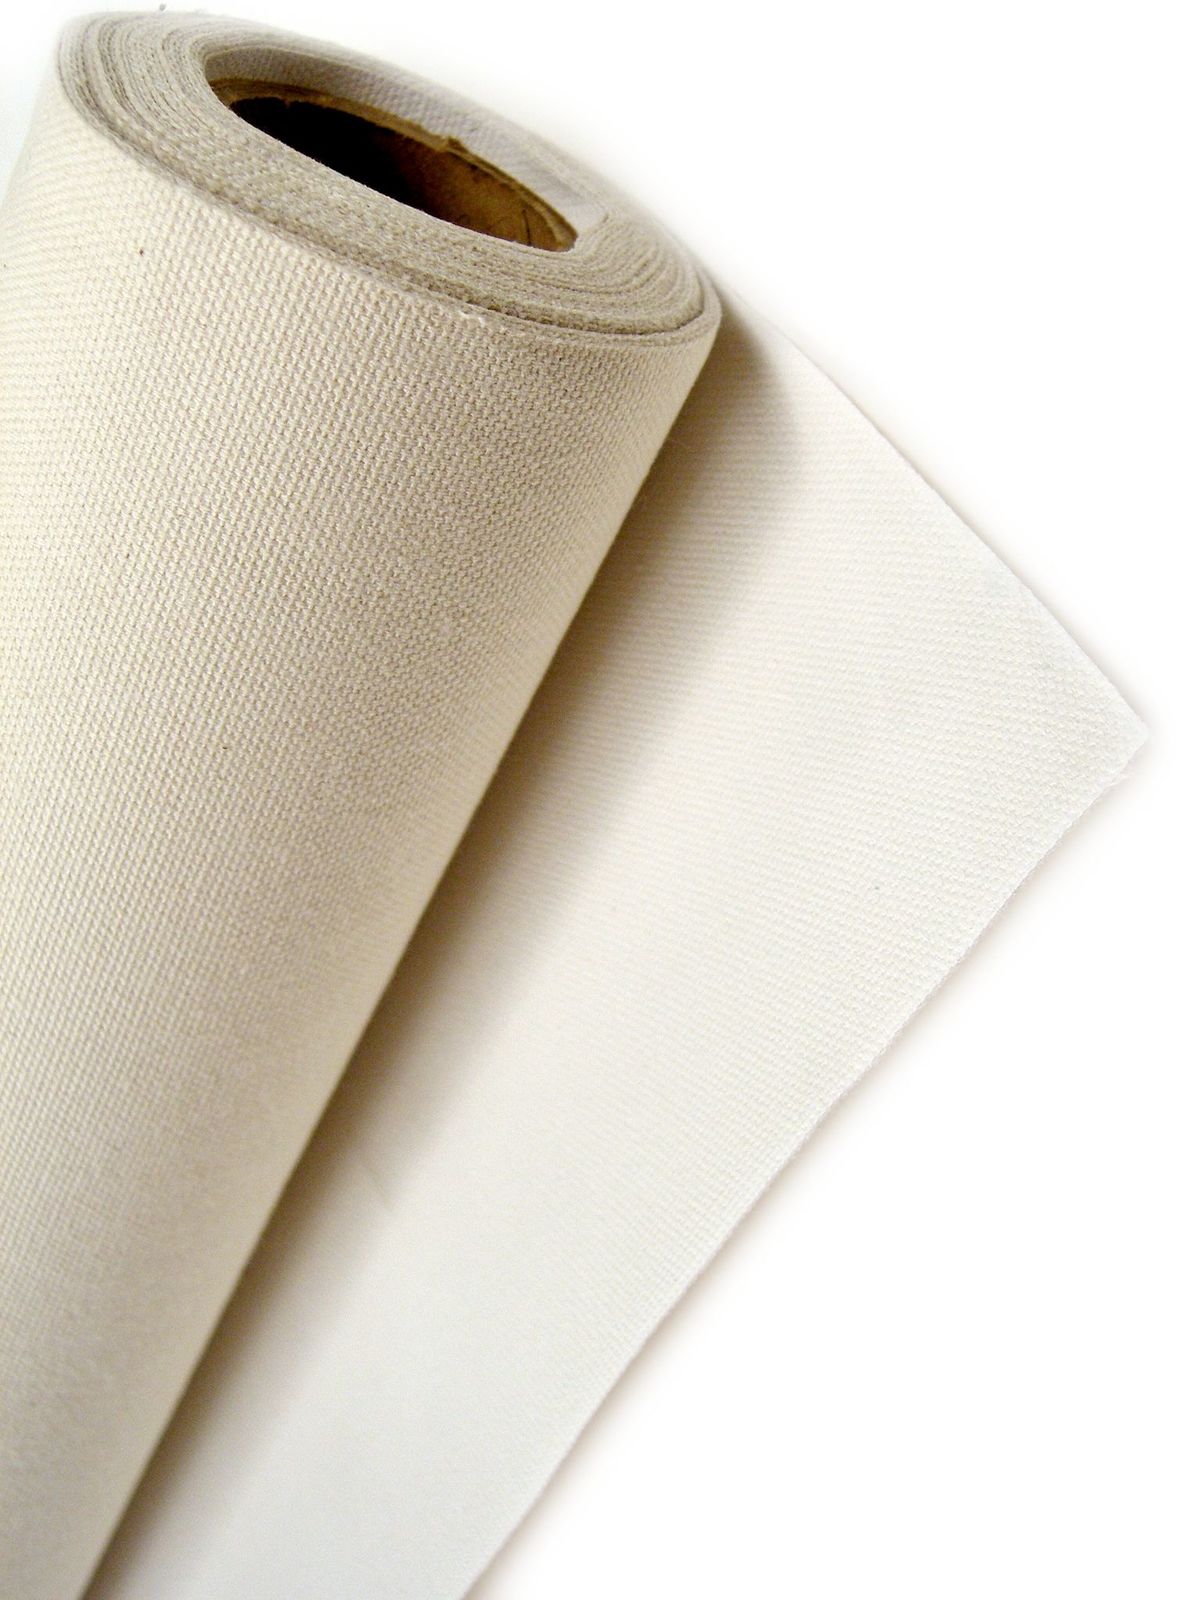 Yankee Primed Cotton Canvas 73 In. X 6 Yd. Roll